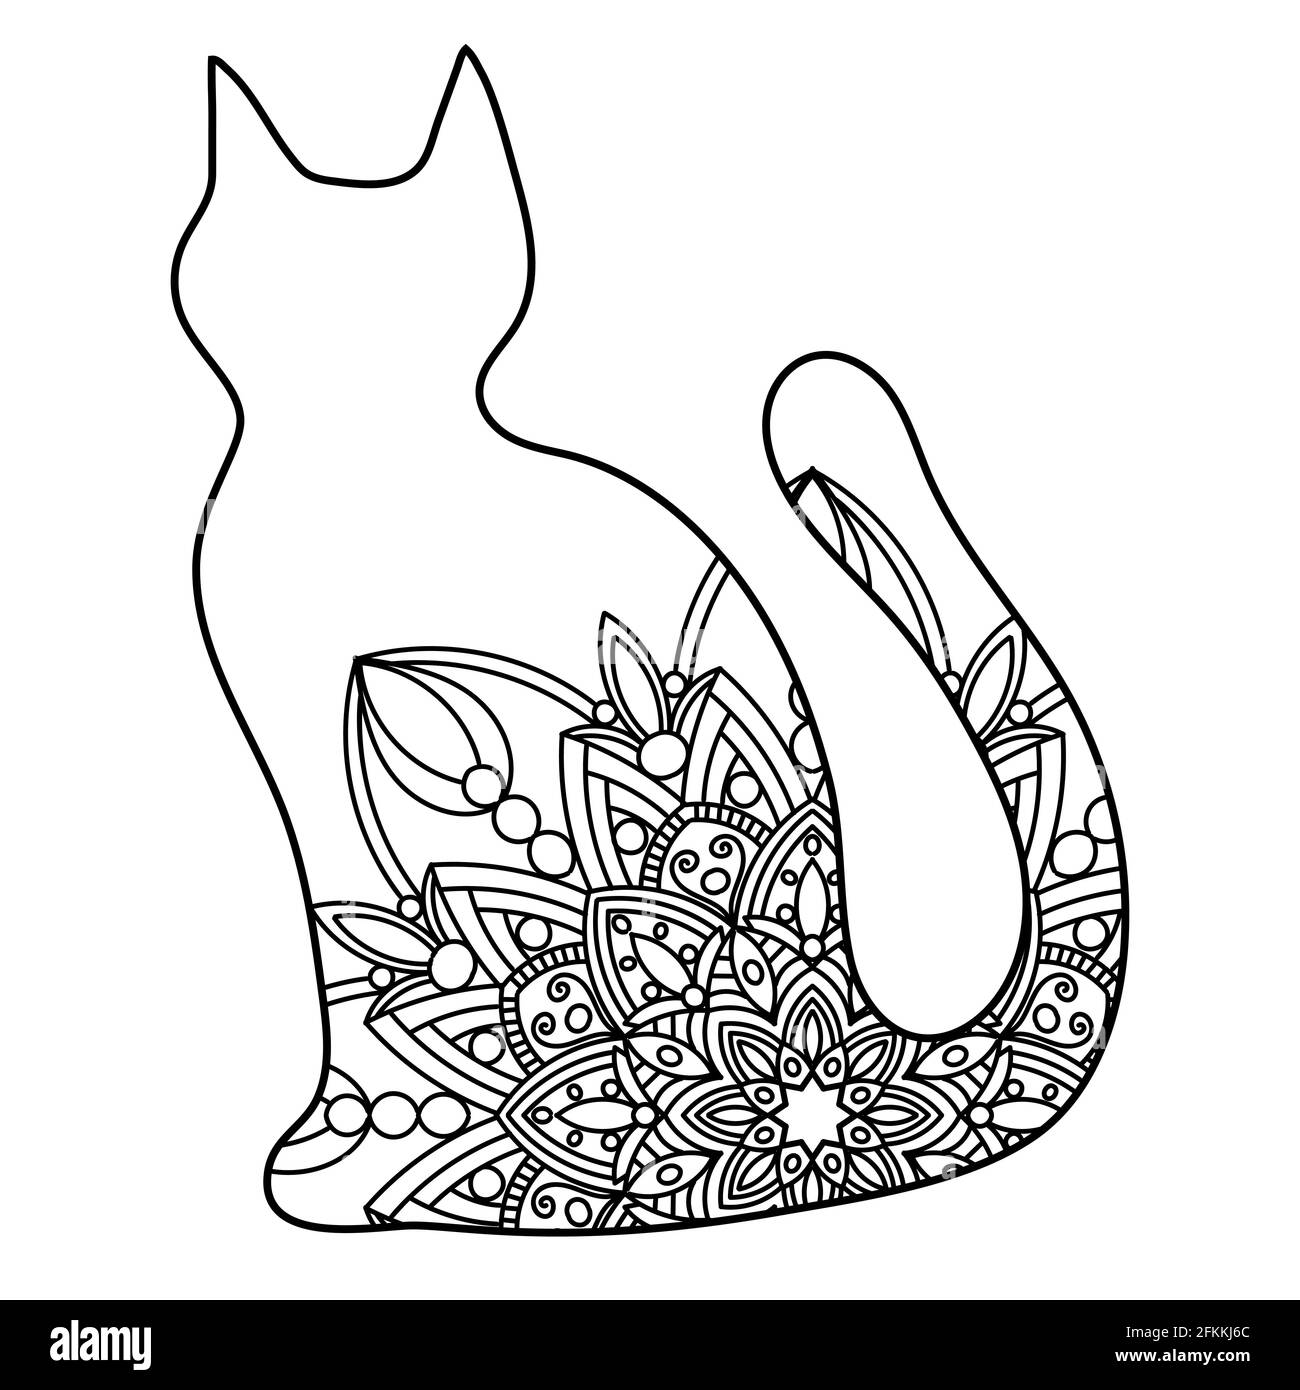 Coloriage adulte chat